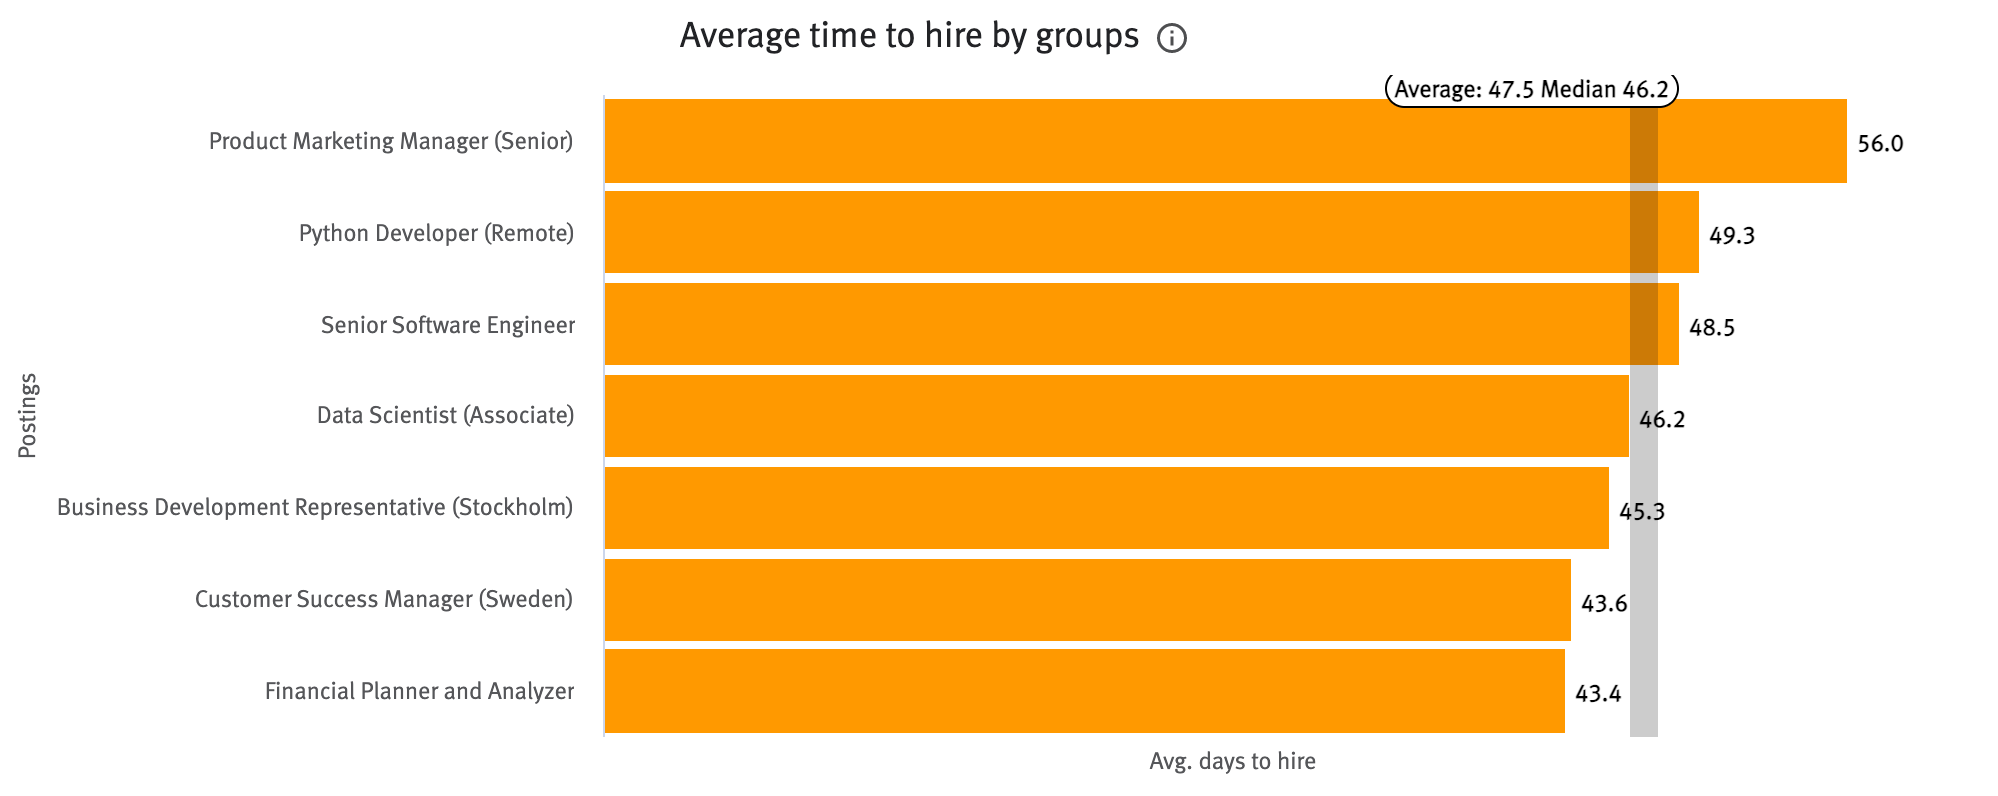 Average time to hire by groups chart